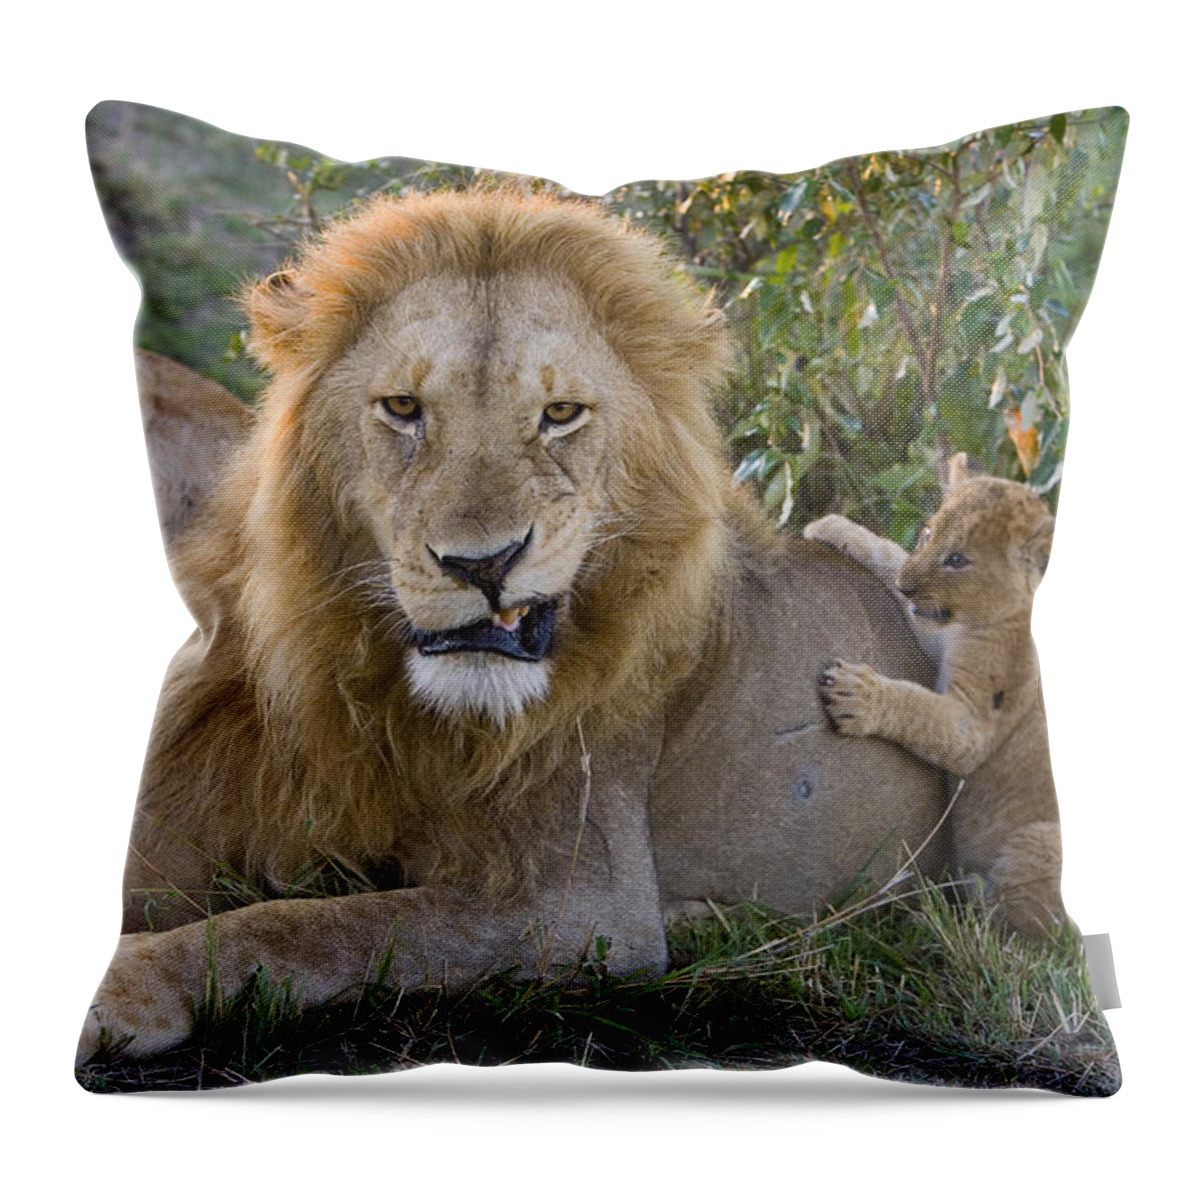 00761280 Throw Pillow featuring the photograph African Lion Cub Playing With Adult #2 by Suzi Eszterhas